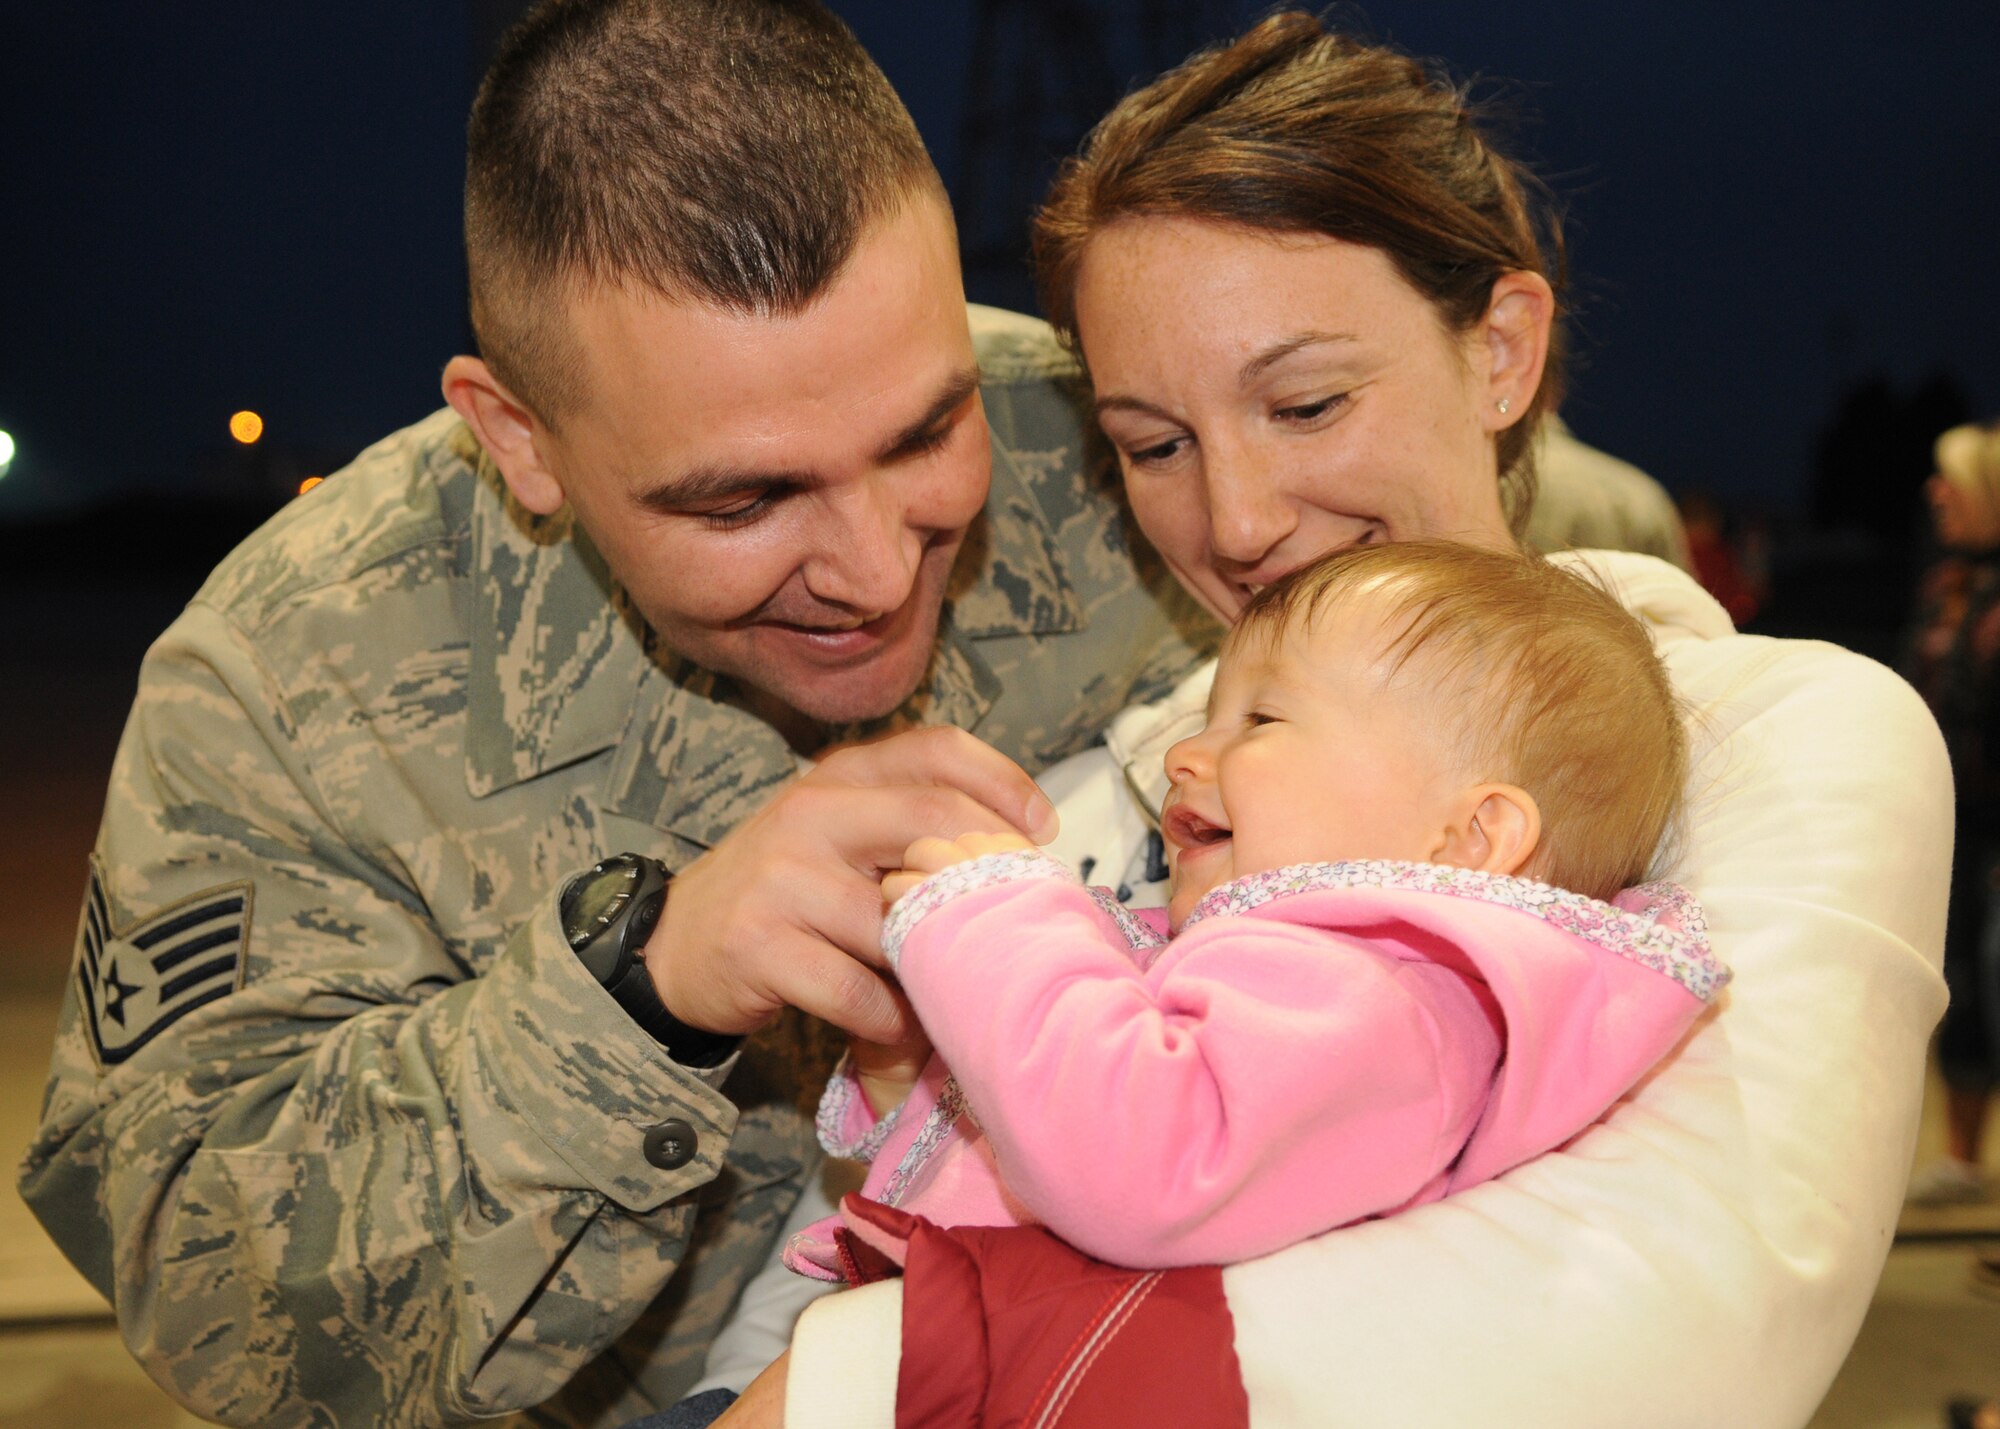 SPANGDAHLEM AIR BASE, Germany - Staff Sgt. Timothy Raso, 52nd Medical Operations Squadron, embraces his wife, Kristy, and daughter, Aaryanna, at the 22nd Fighter Squadron redeployment party Sept. 28 at a hanger her. Sergeant Raso provided medical support for the 22nd FS while deployed to Joint Base Balad, Iraq. During the four-month deployment, the 22nd FS flew nearly 1,500 sorties and logged more than 6,000 hours of flight time in support of Operation Iraqi Freedom. (U.S. Air Force photo/Airman 1st Class Nathanael Callon)